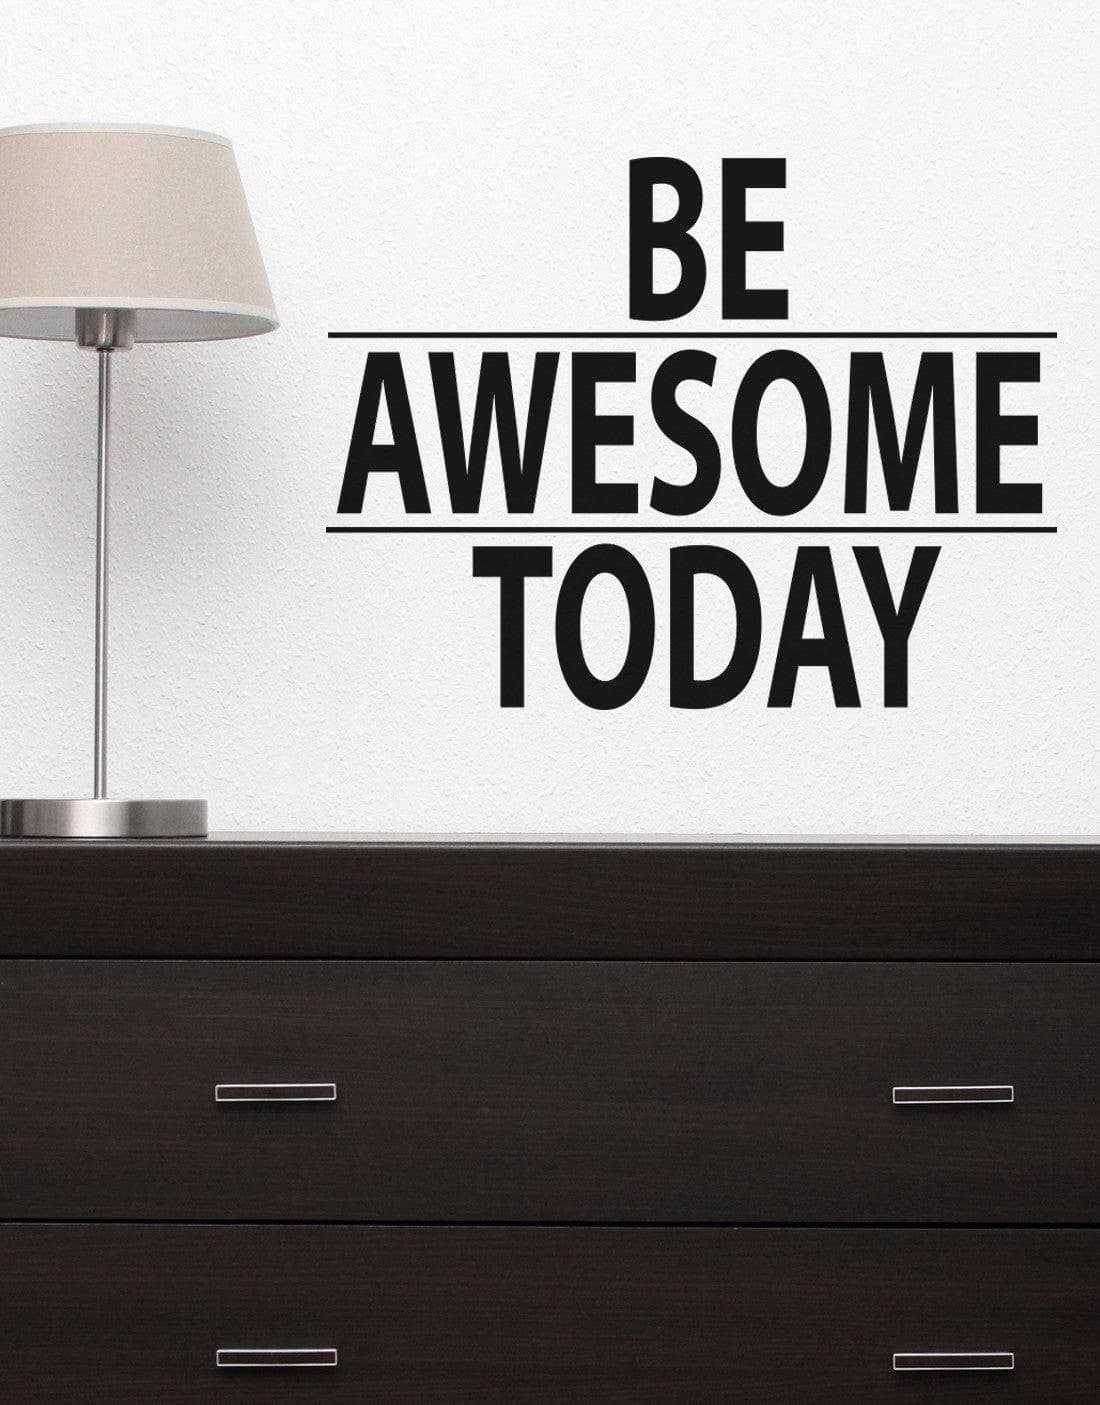 A black text decal saying "BE AWESOME TODAY" on a white wall over a black cabinet.